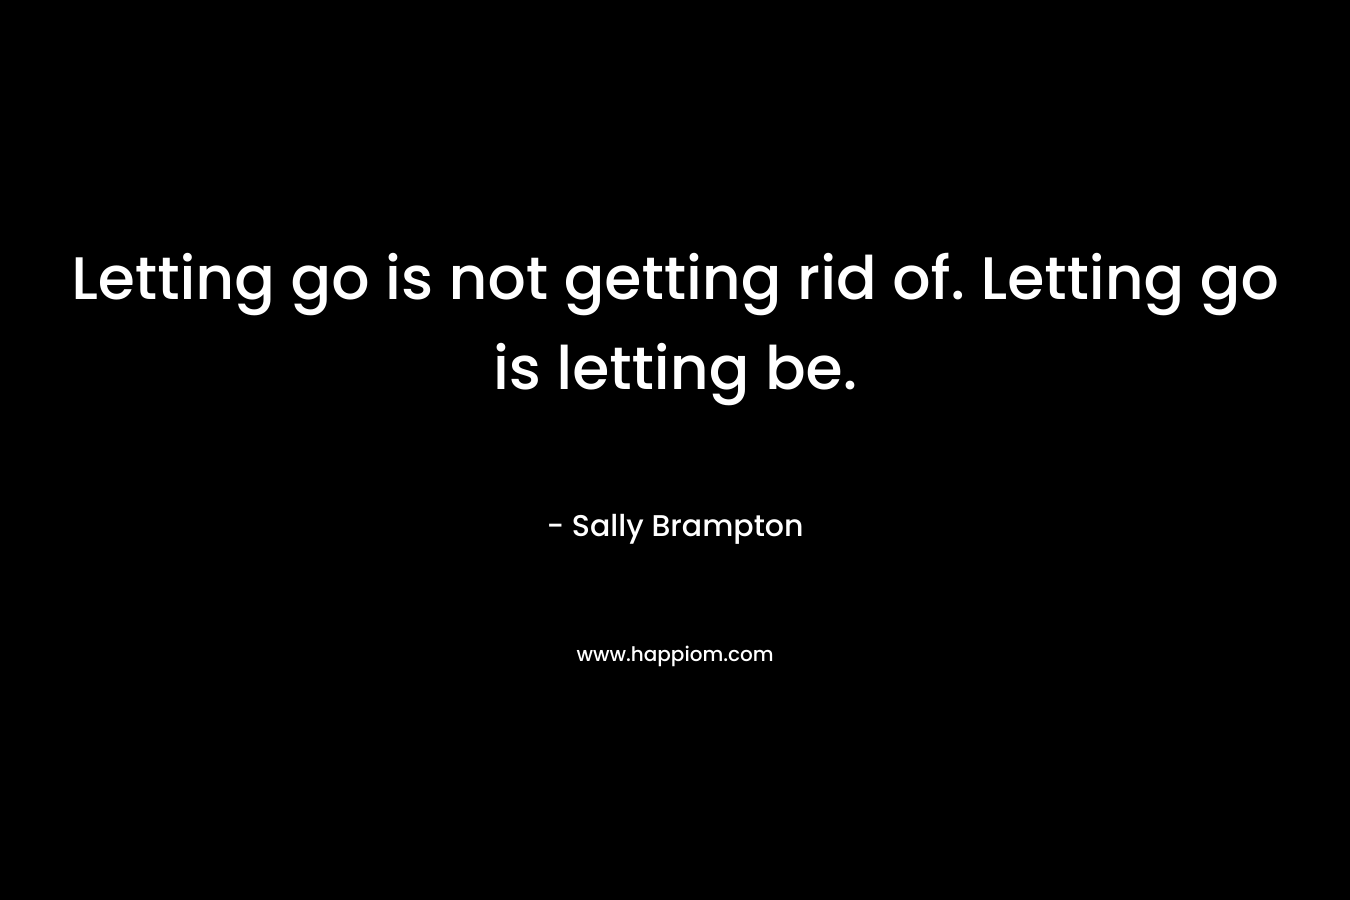 Letting go is not getting rid of. Letting go is letting be. – Sally Brampton